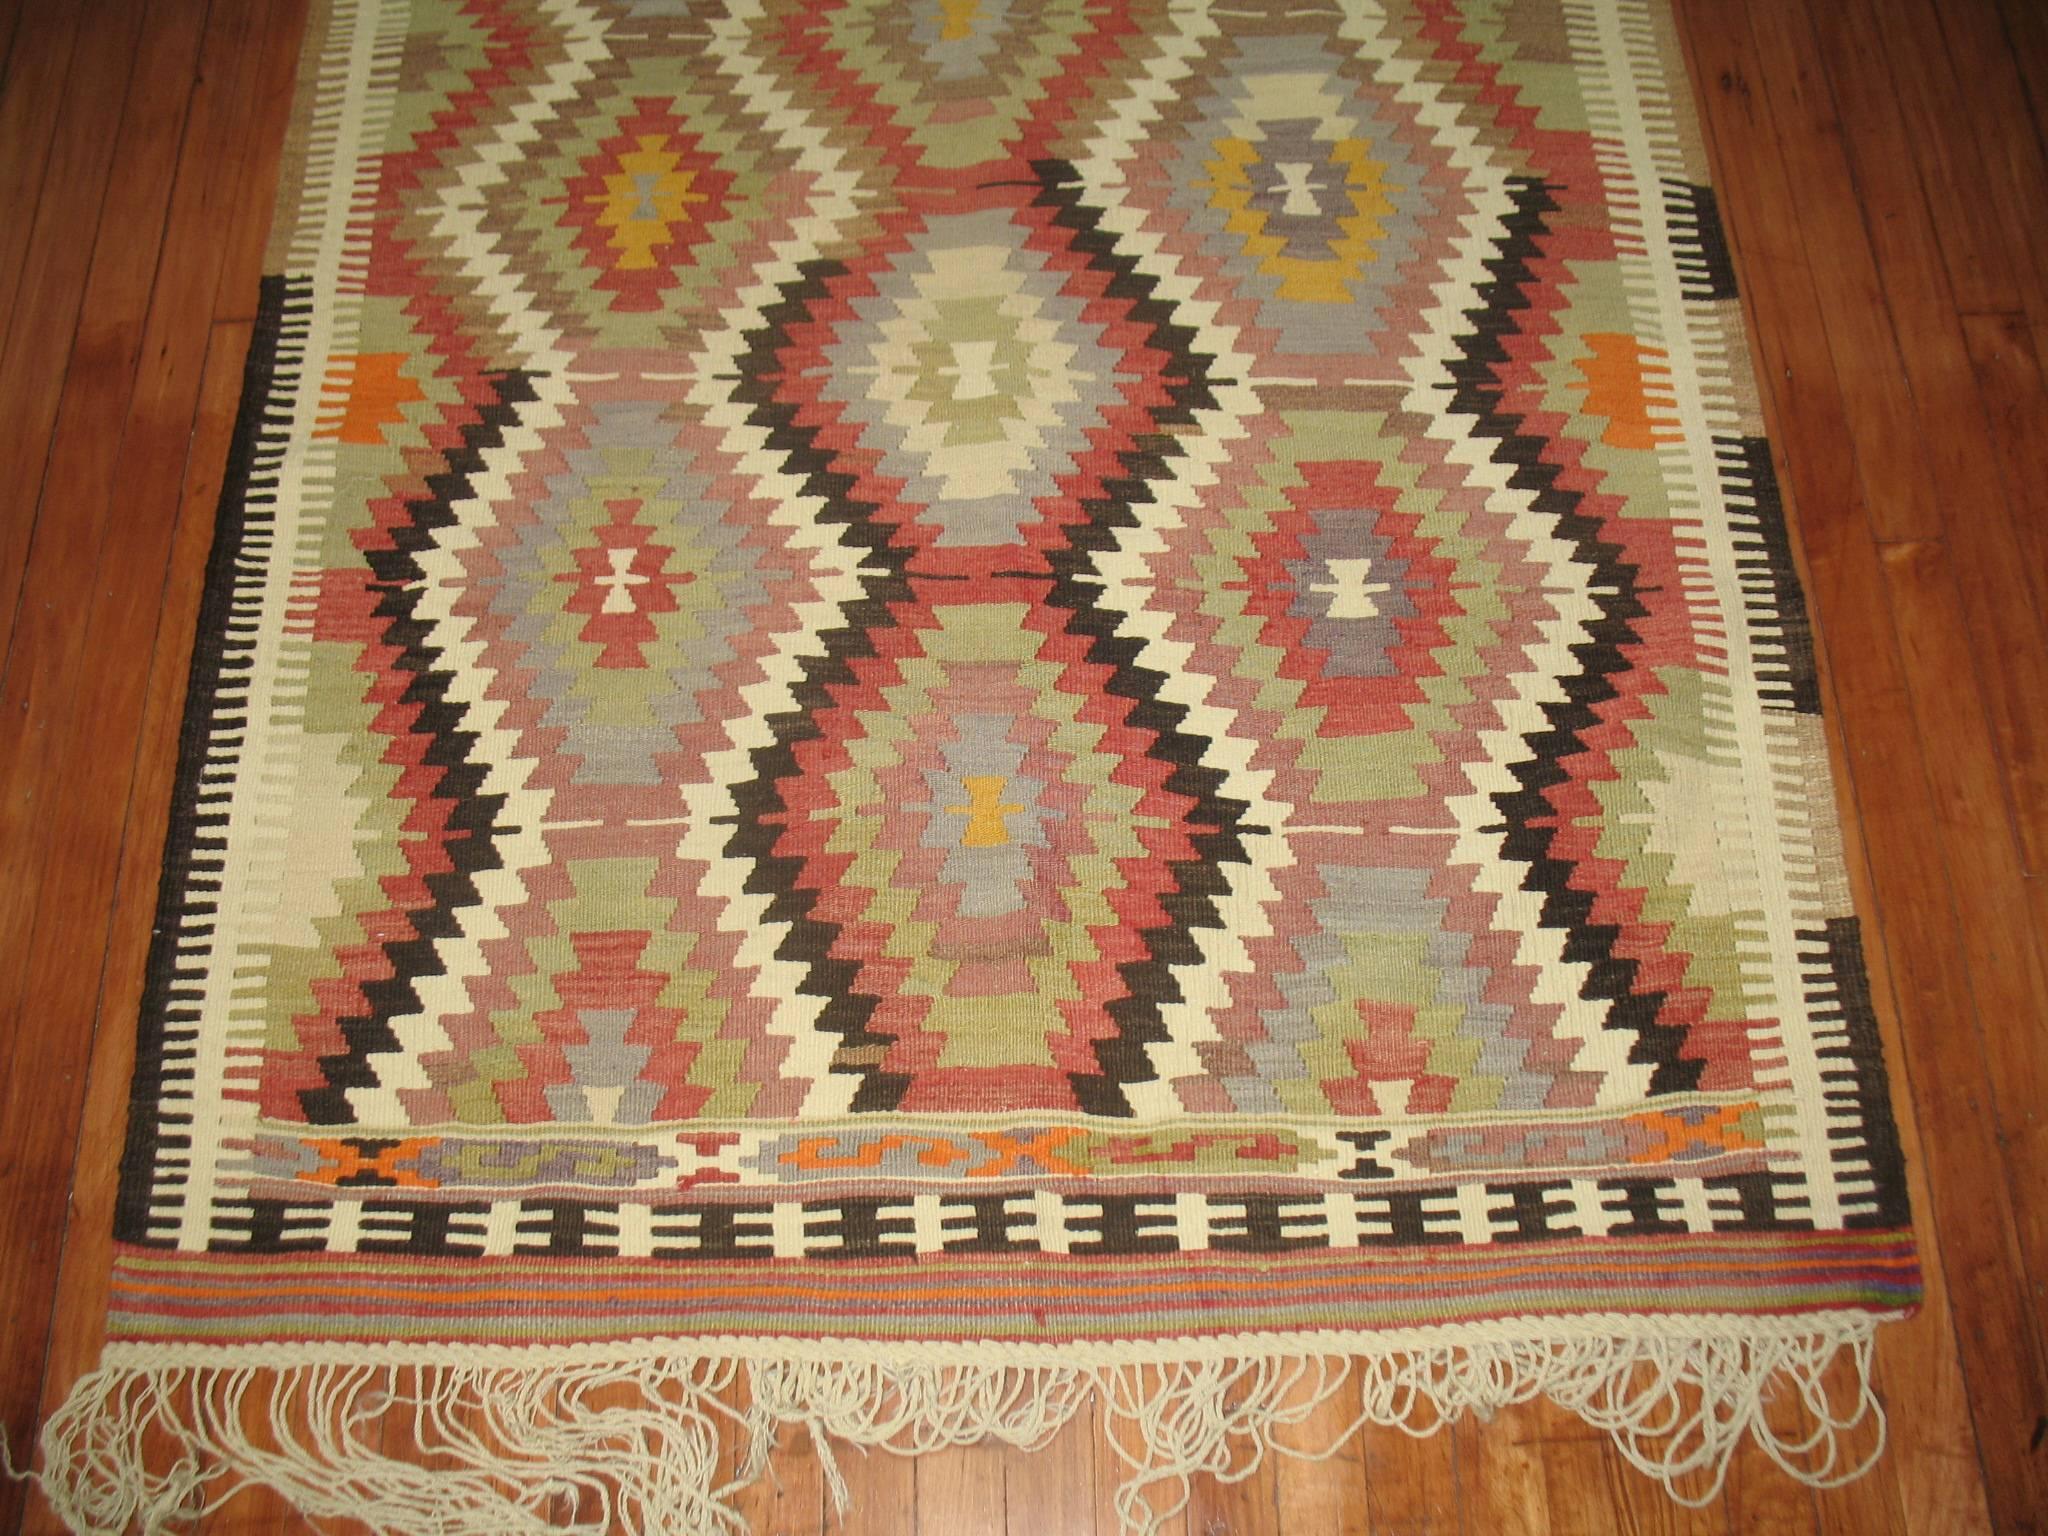 A vintage geometric Turkish Kilim scatter rug from the mid-20th century.

Measures: 4'1'' x 6'3''.